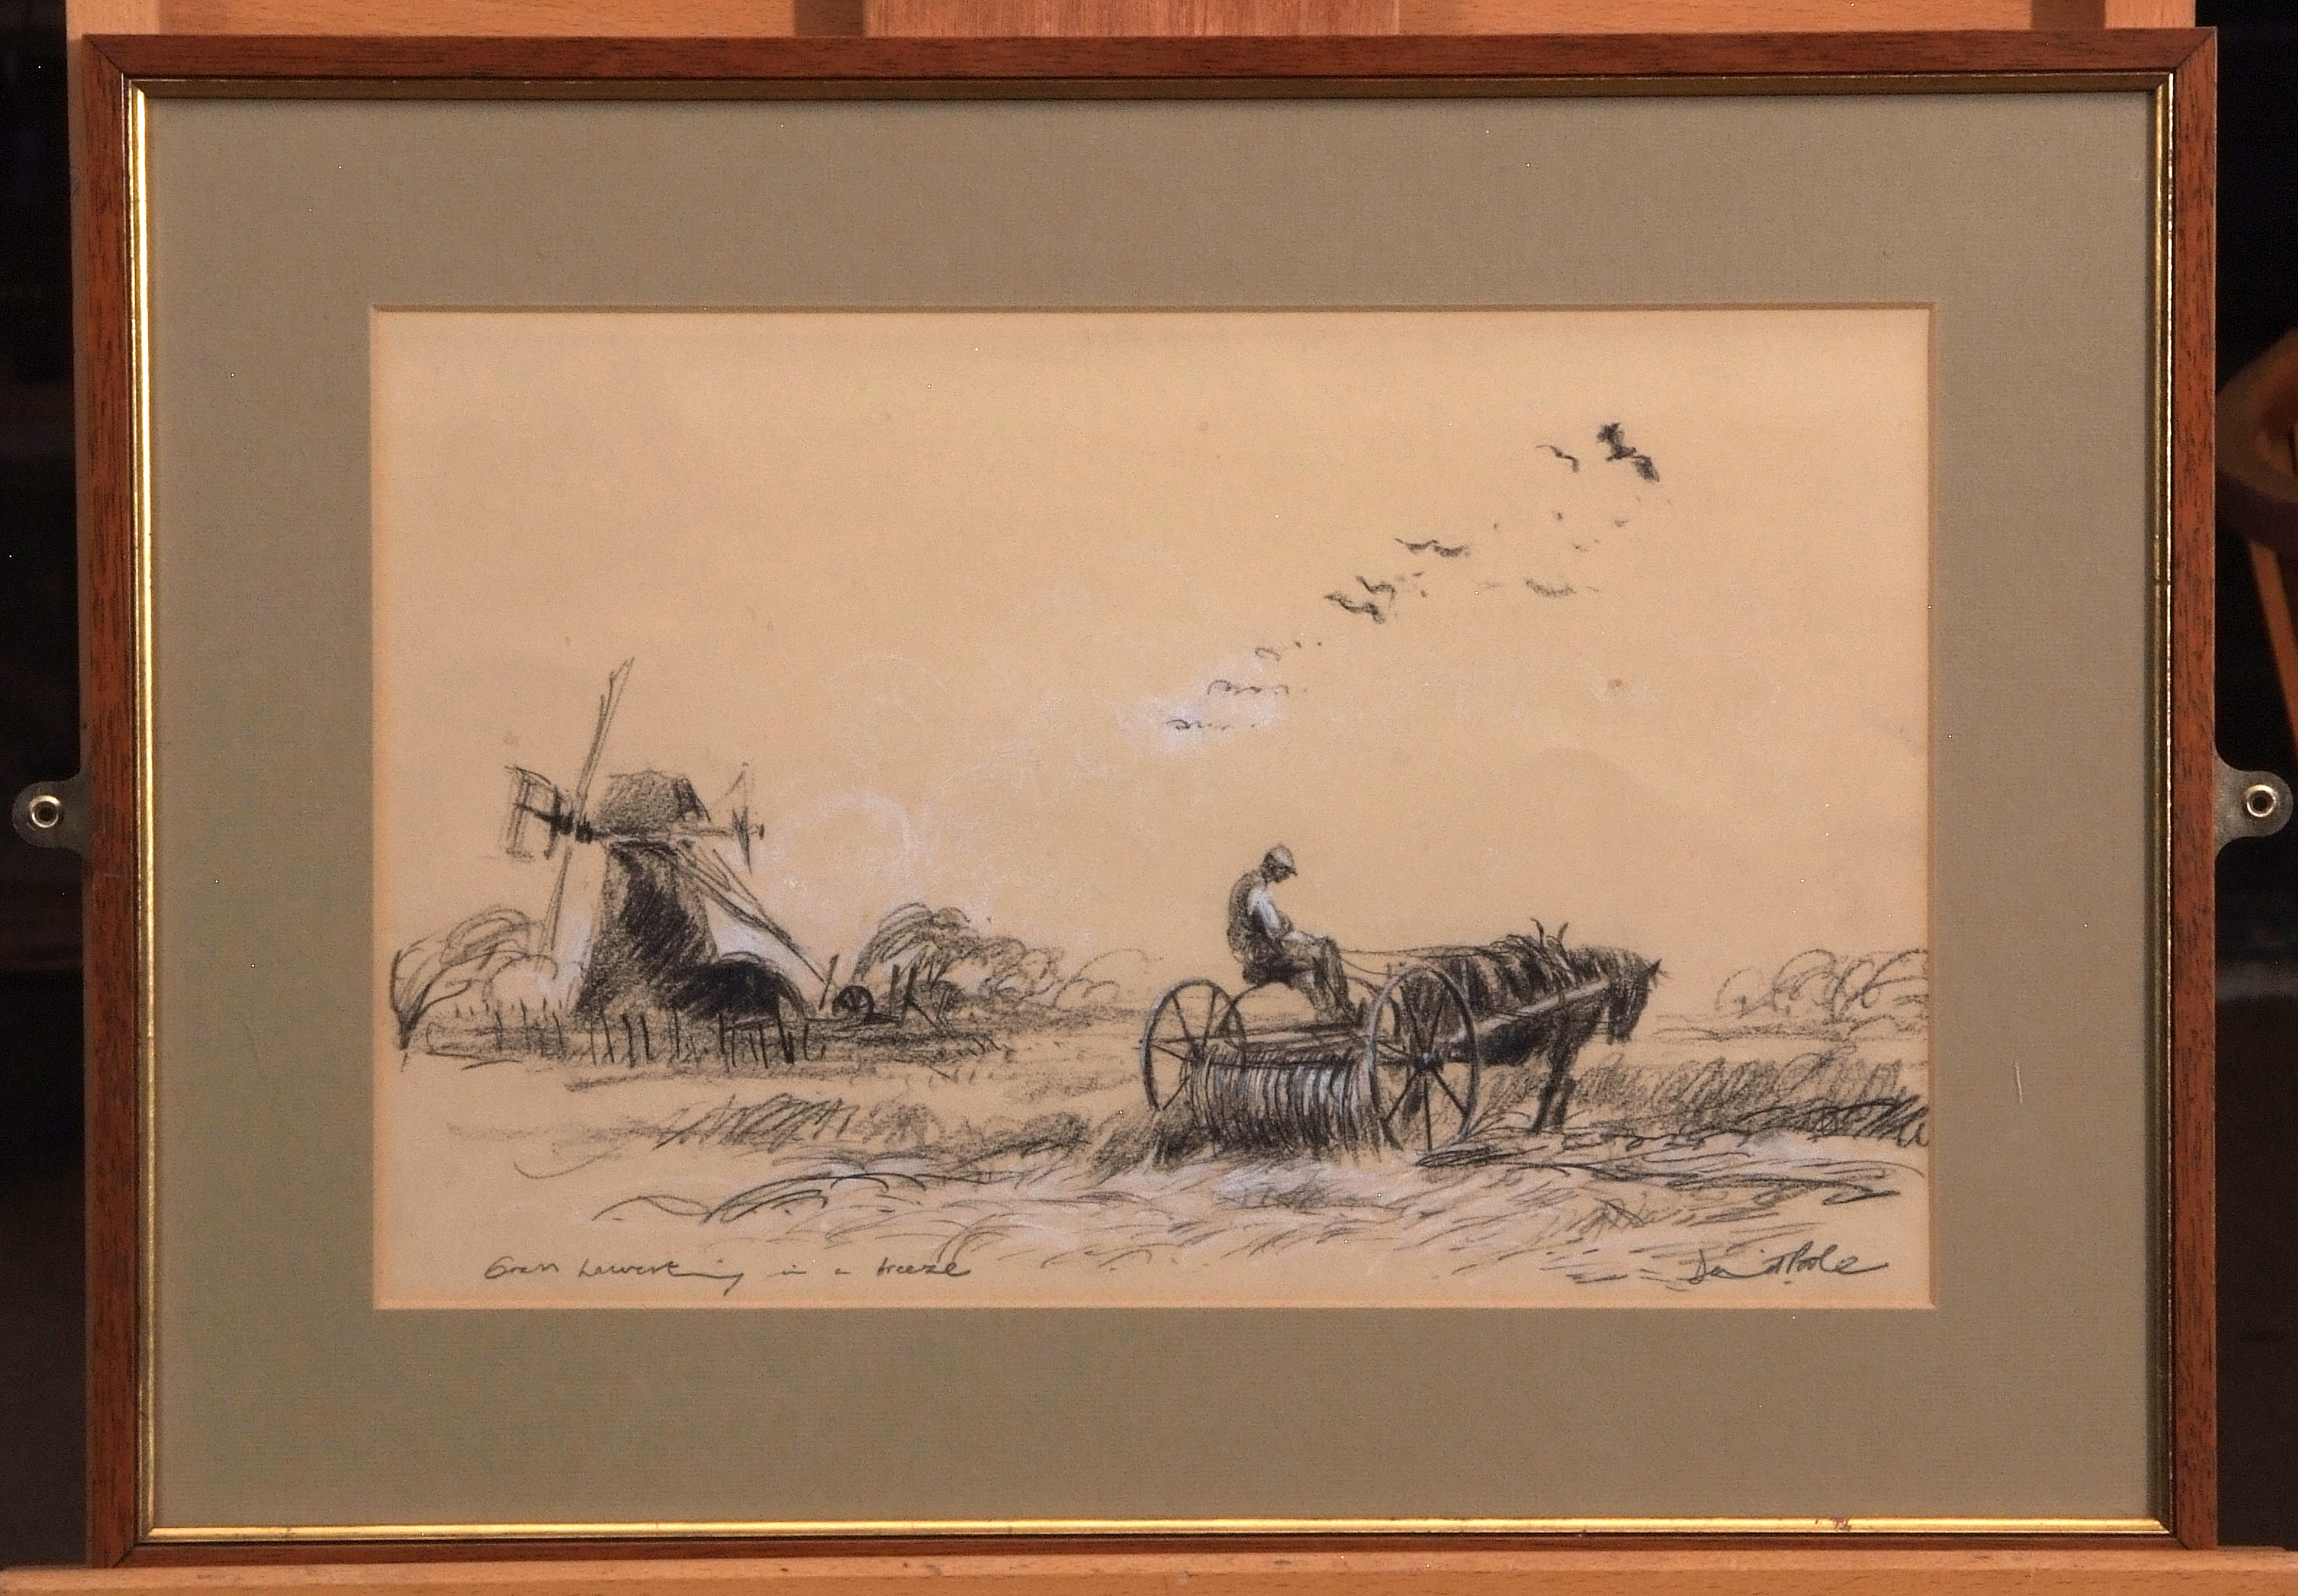 AR David Poole (1936-1995), "Mill Farm, Acle, May 2nd 1973", pencil drawing, signed and inscribed - Image 3 of 6